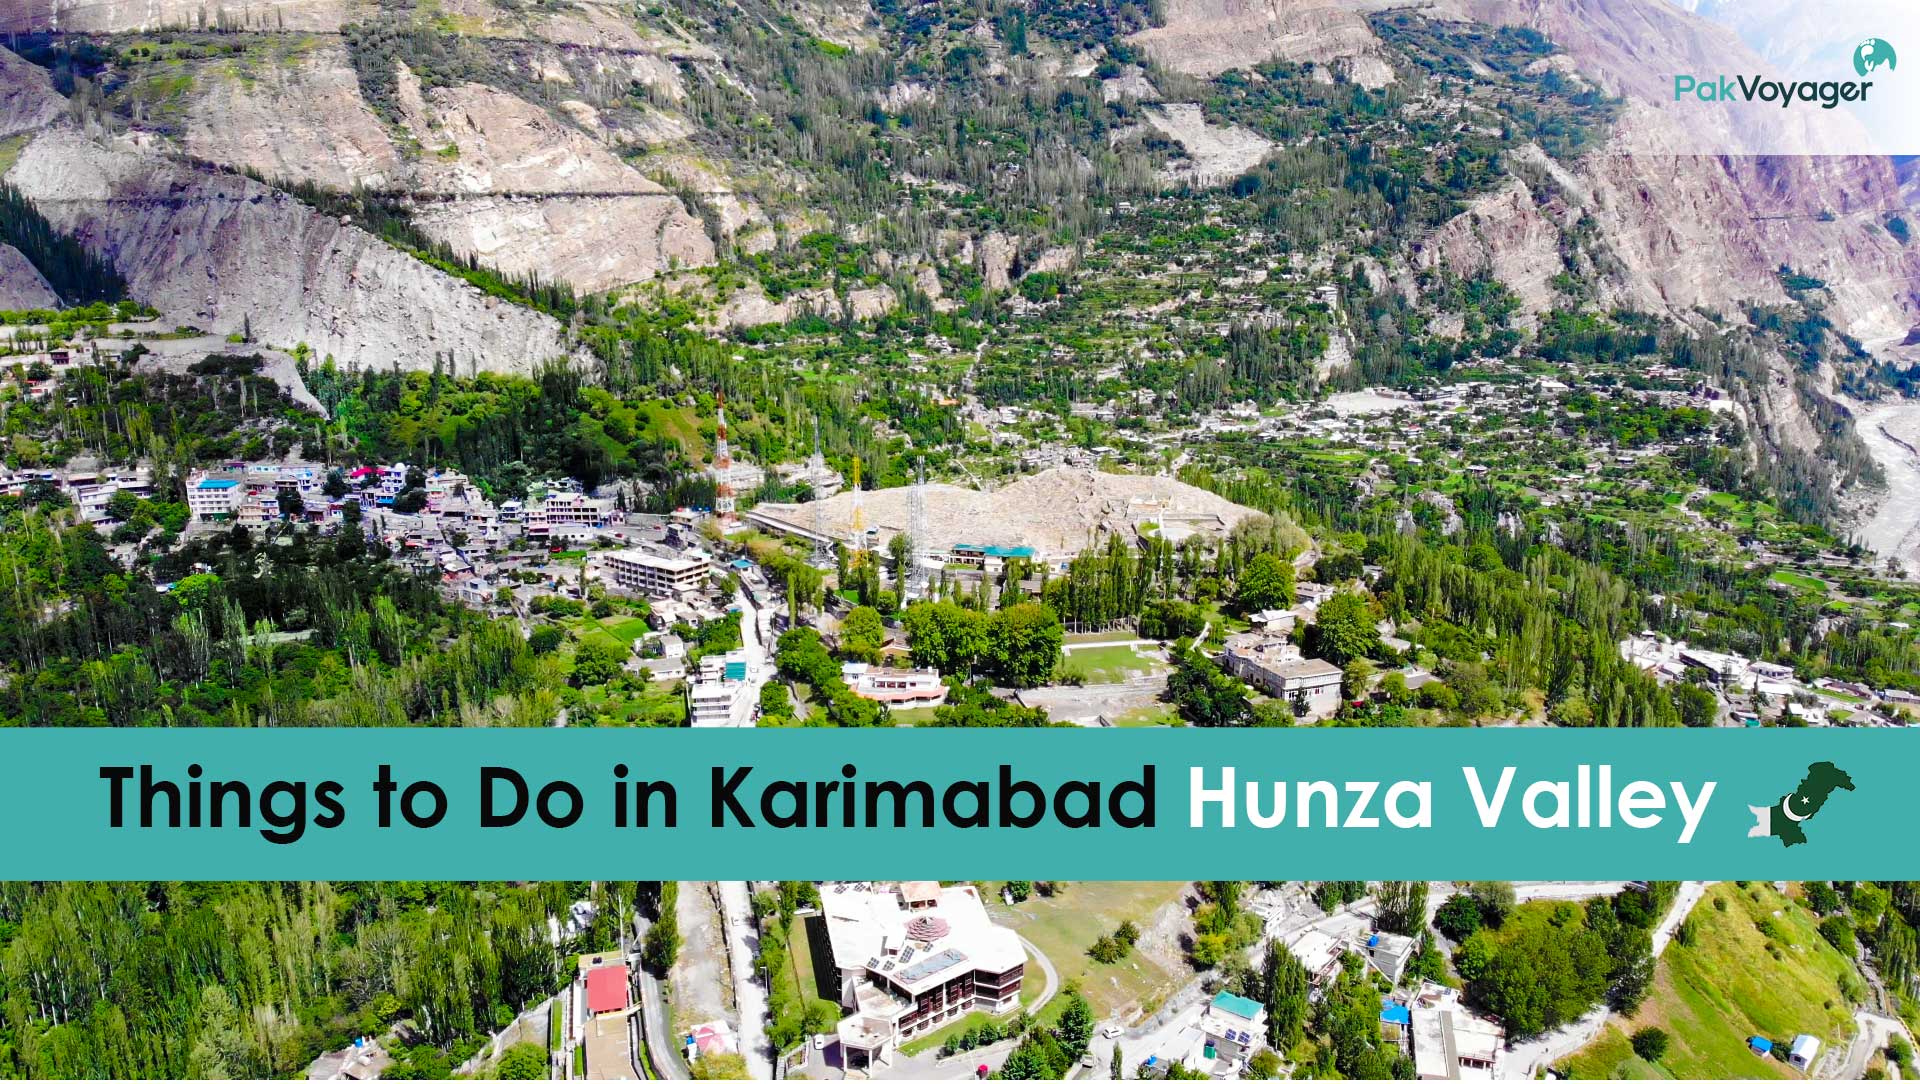 Things To Do in Karimabad Hunza Valley